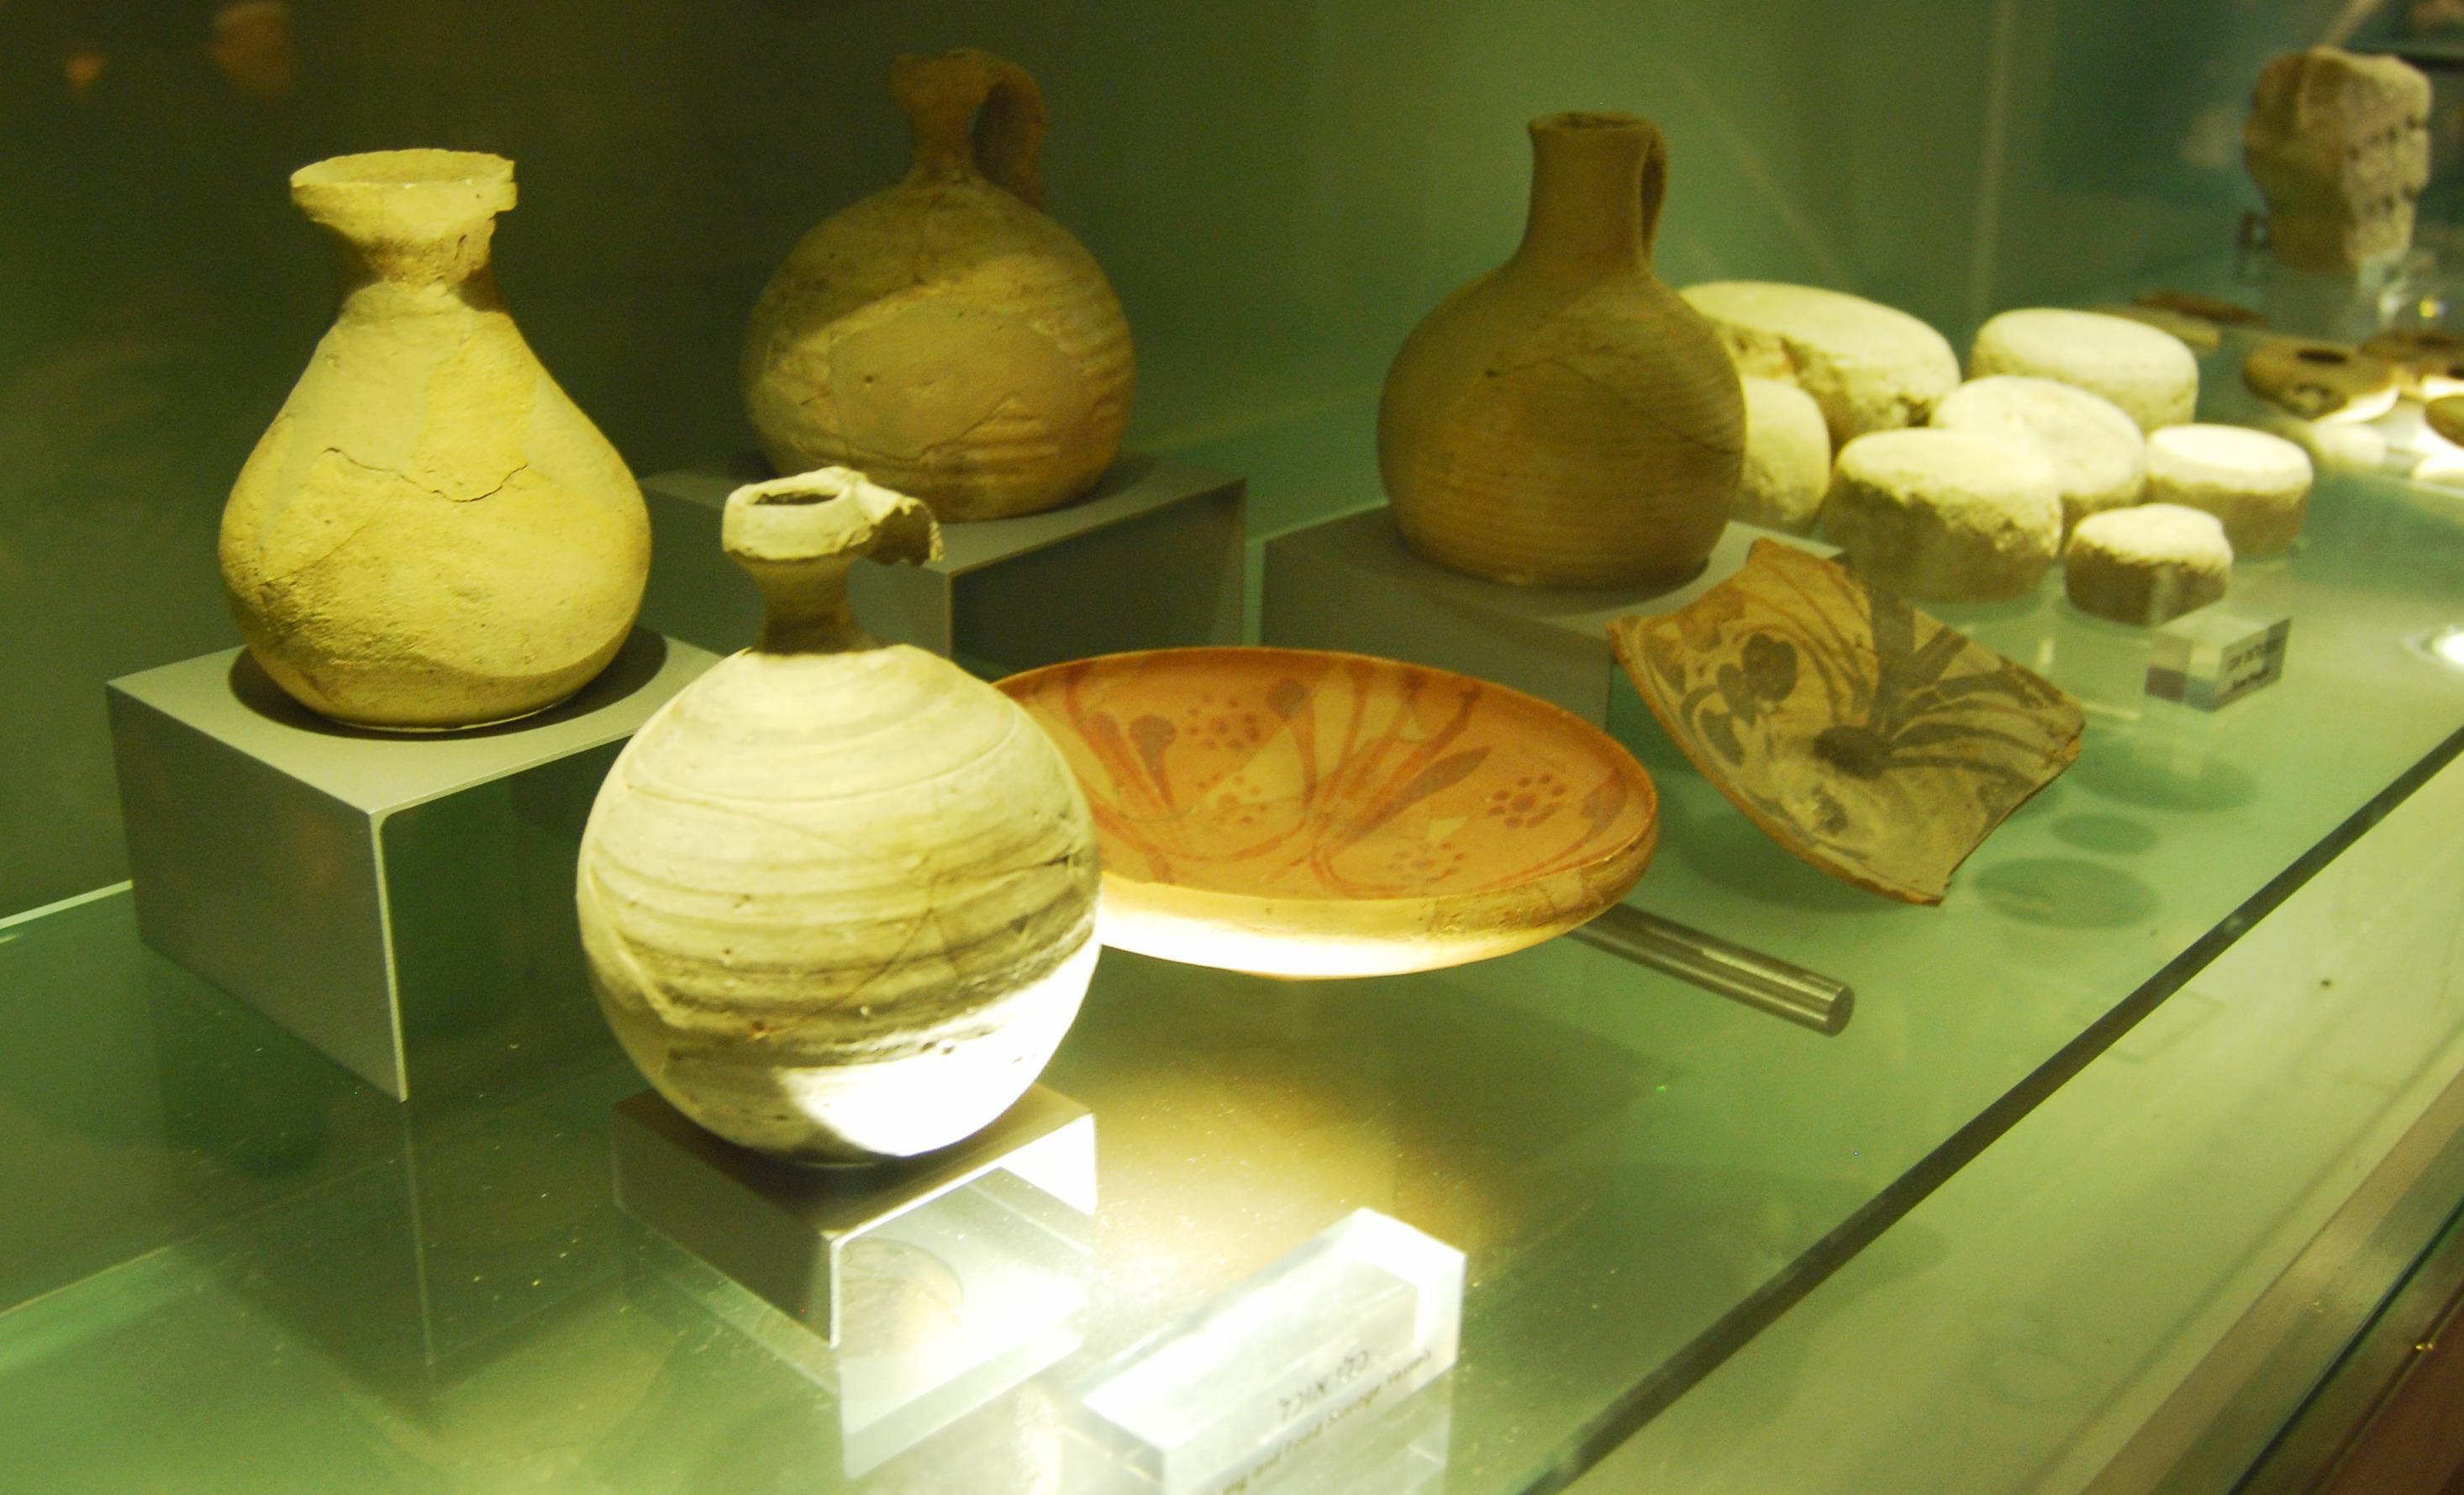 Roman kitchenware in the burnt house.